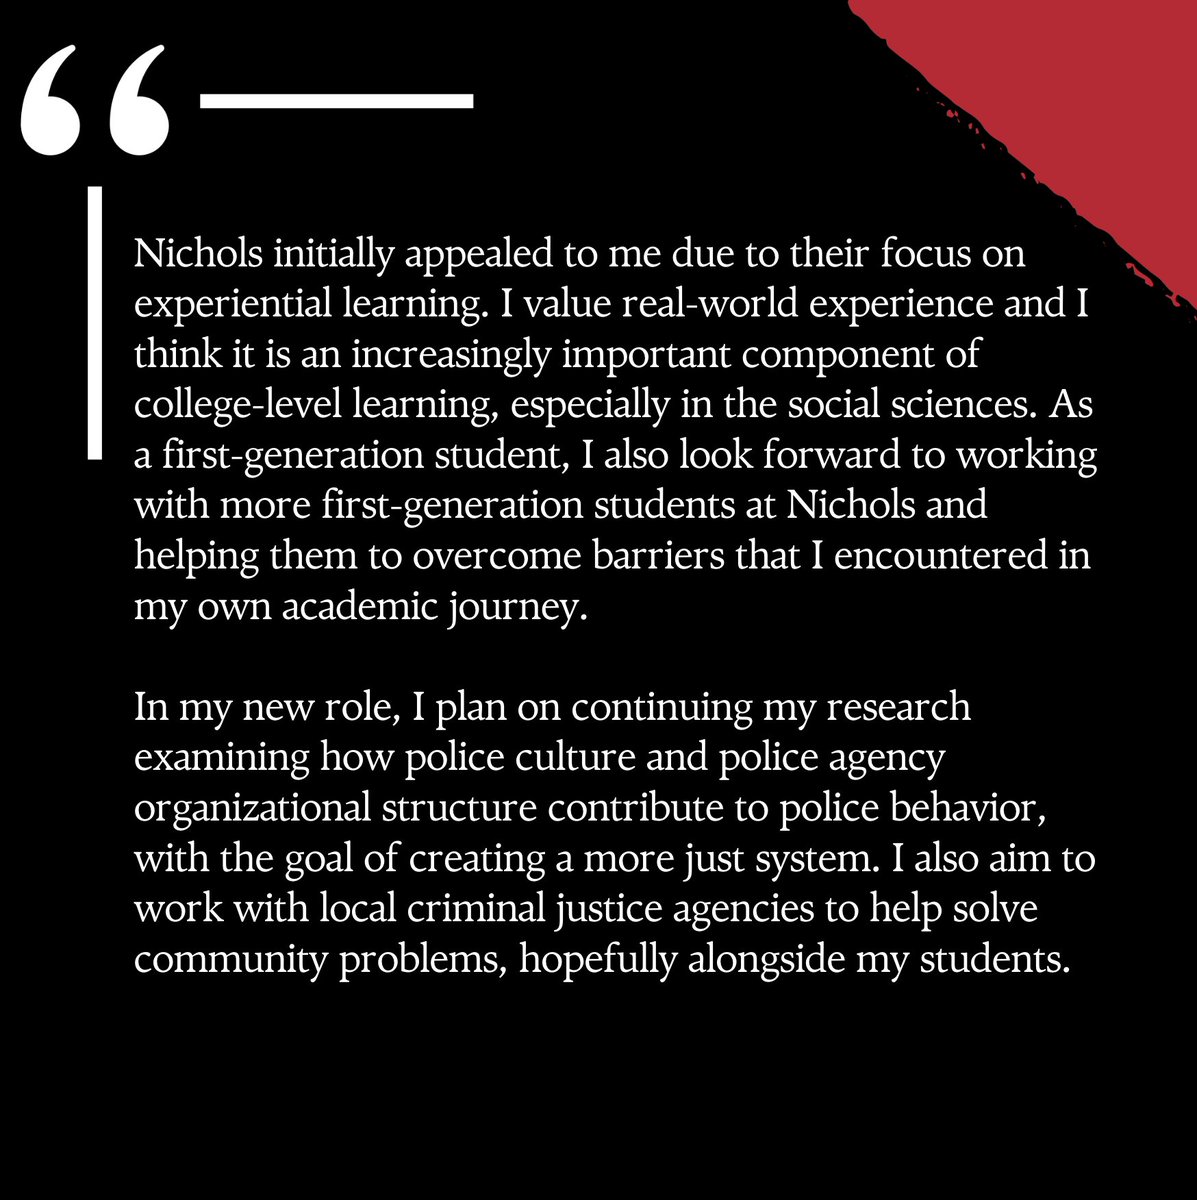 Congratulations to Nathan Lawshe on accepting an Assistant Professor position at @Nichols_College. Nathan has achieved an incredible amount during his time as a PhD student at Northeastern, and we are excited to see what he accomplishes at Nichols College!